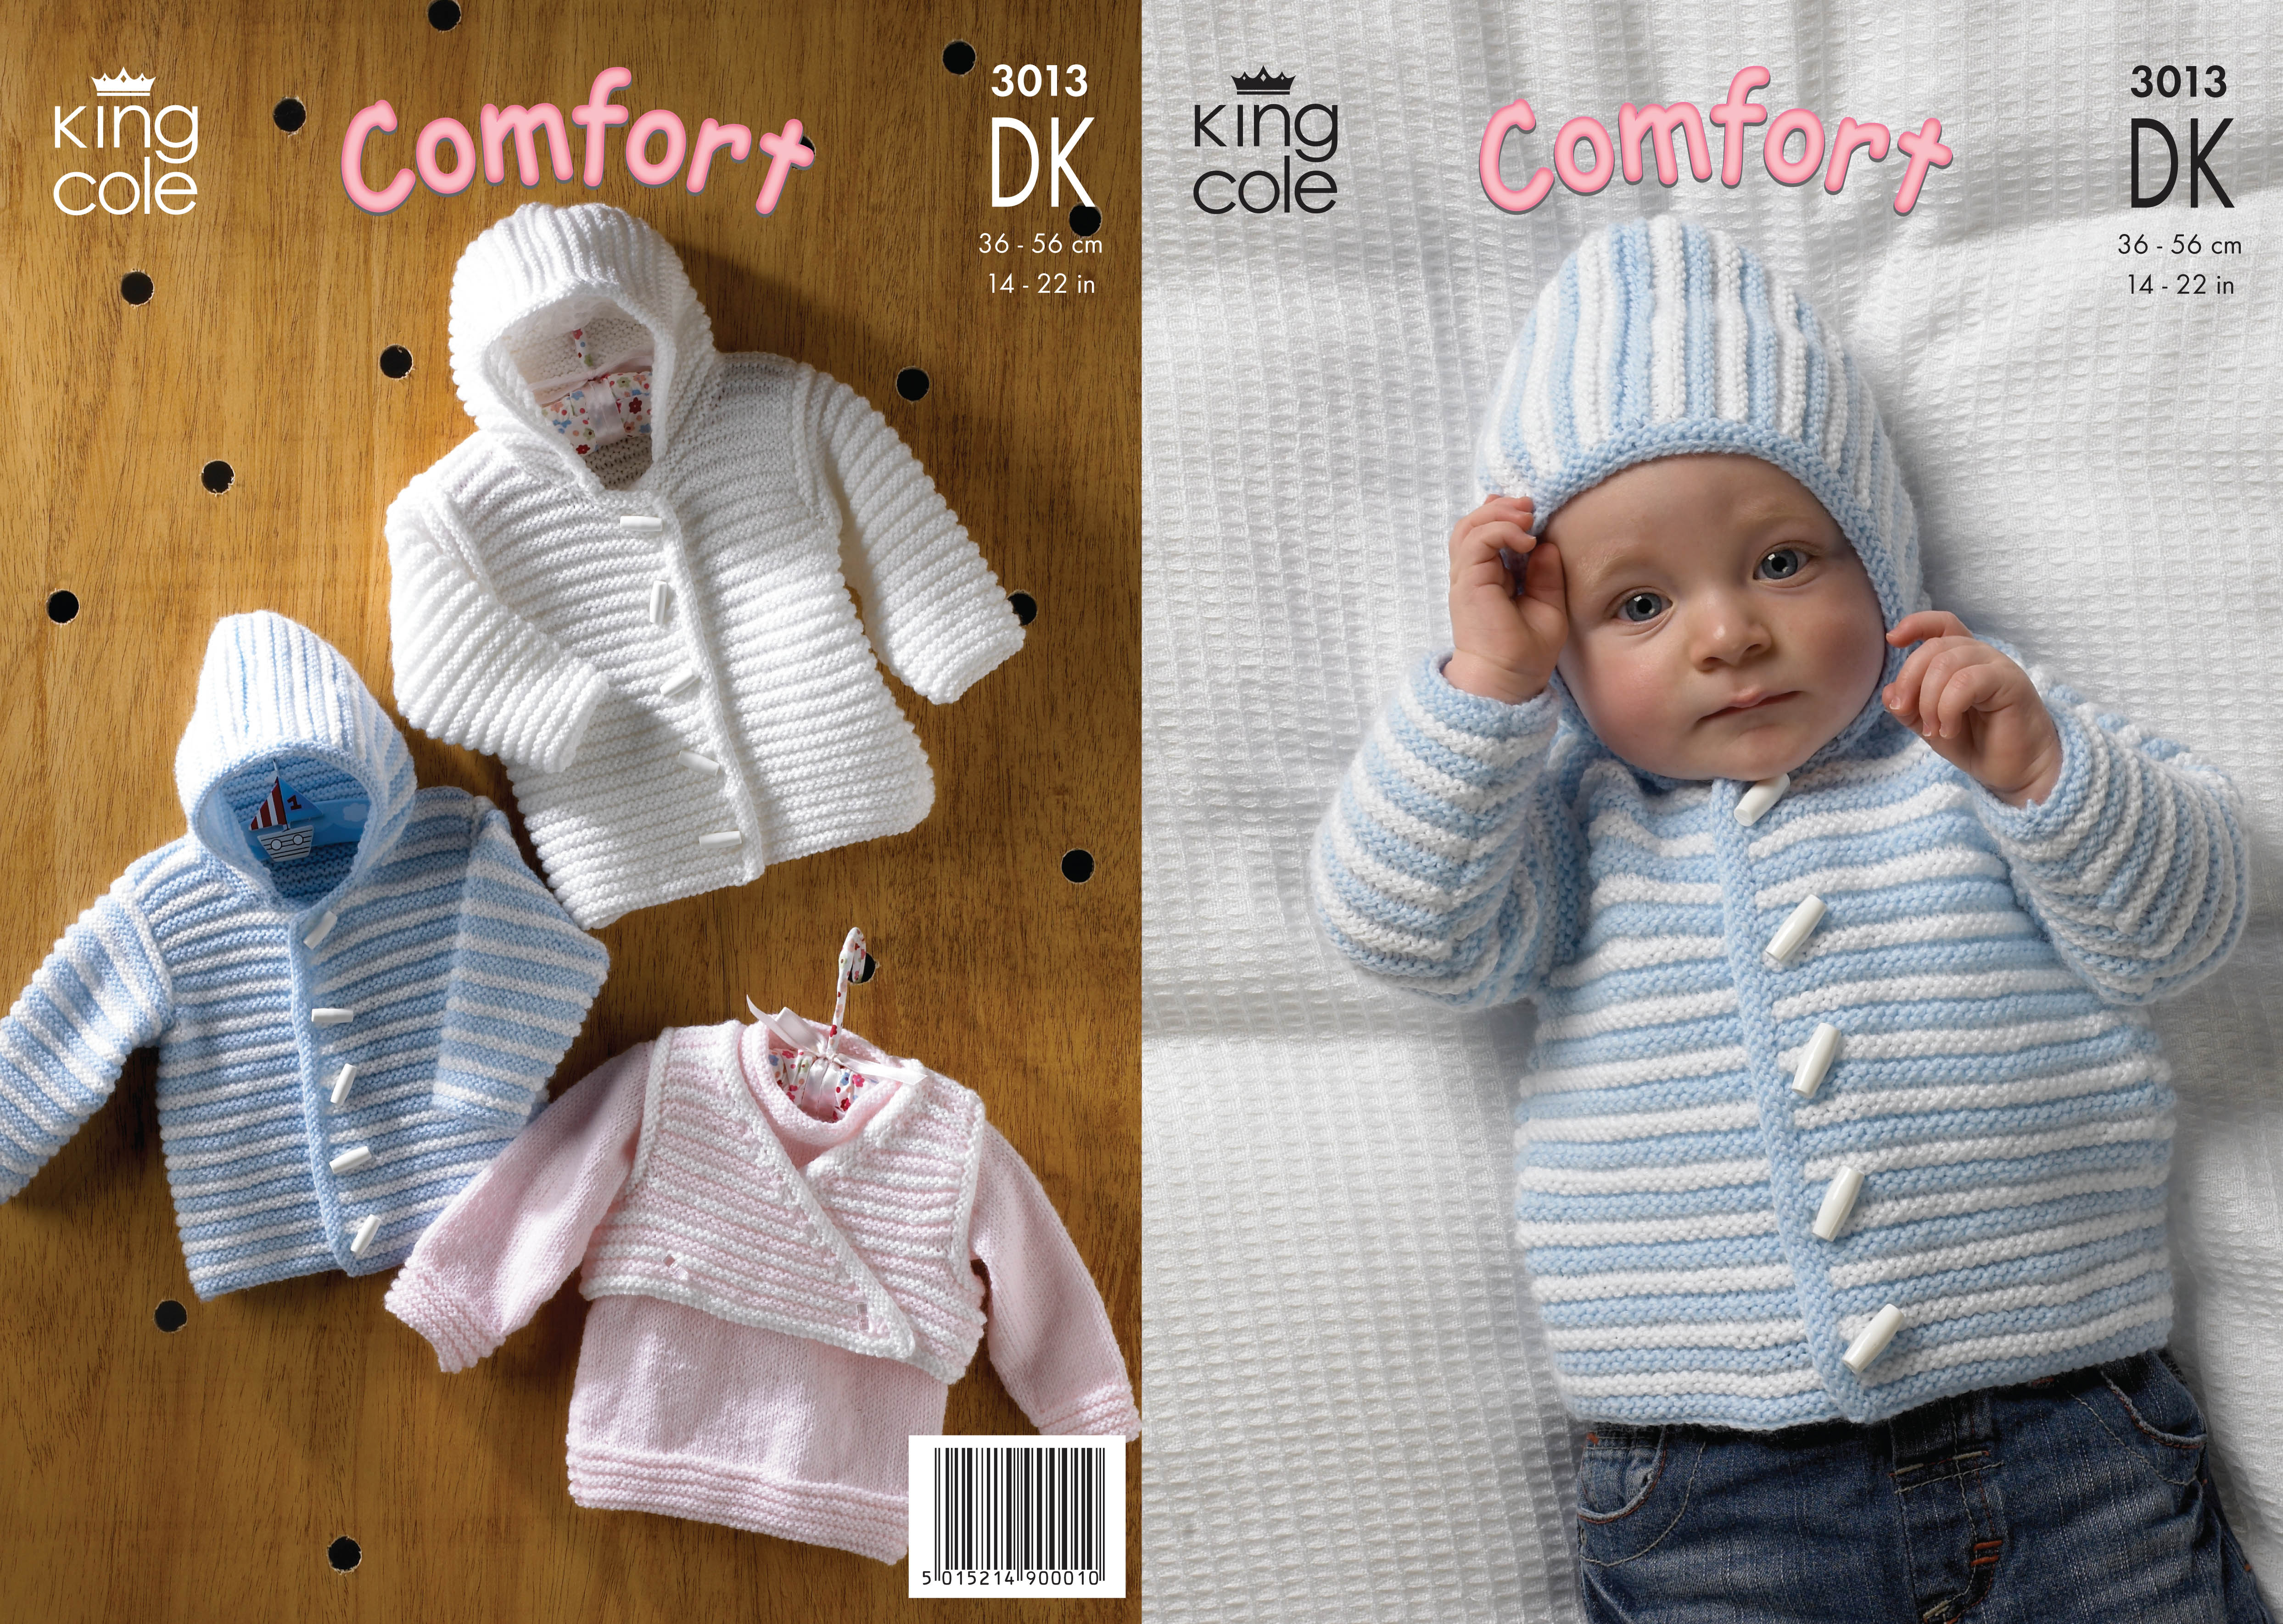 Double Knitting Baby Patterns Details About King Cole Double Knitting Dk Pattern Ba Sweater Hooded Jacket Body Warmer 3013